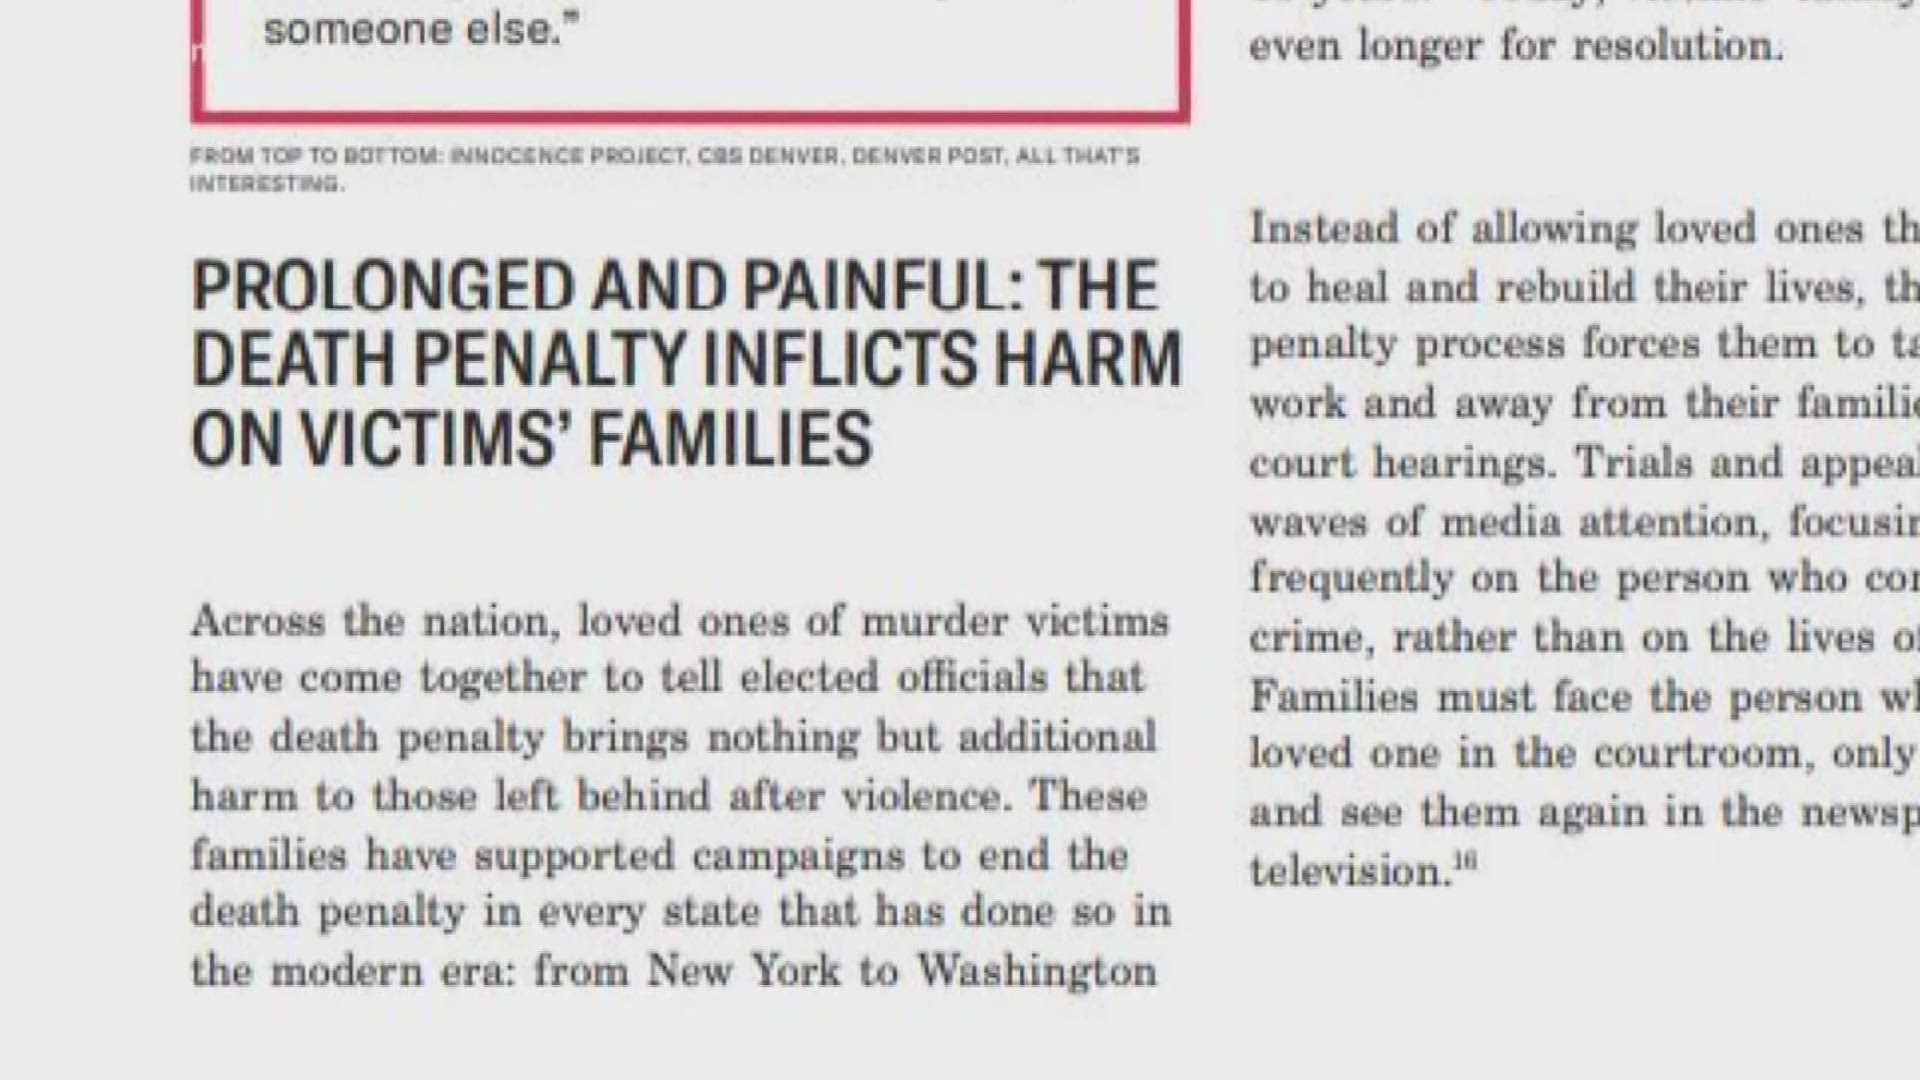 The ACLU report argues that the death penalty is costly for taxpayers and does not act as an effective deterrent for criminals.